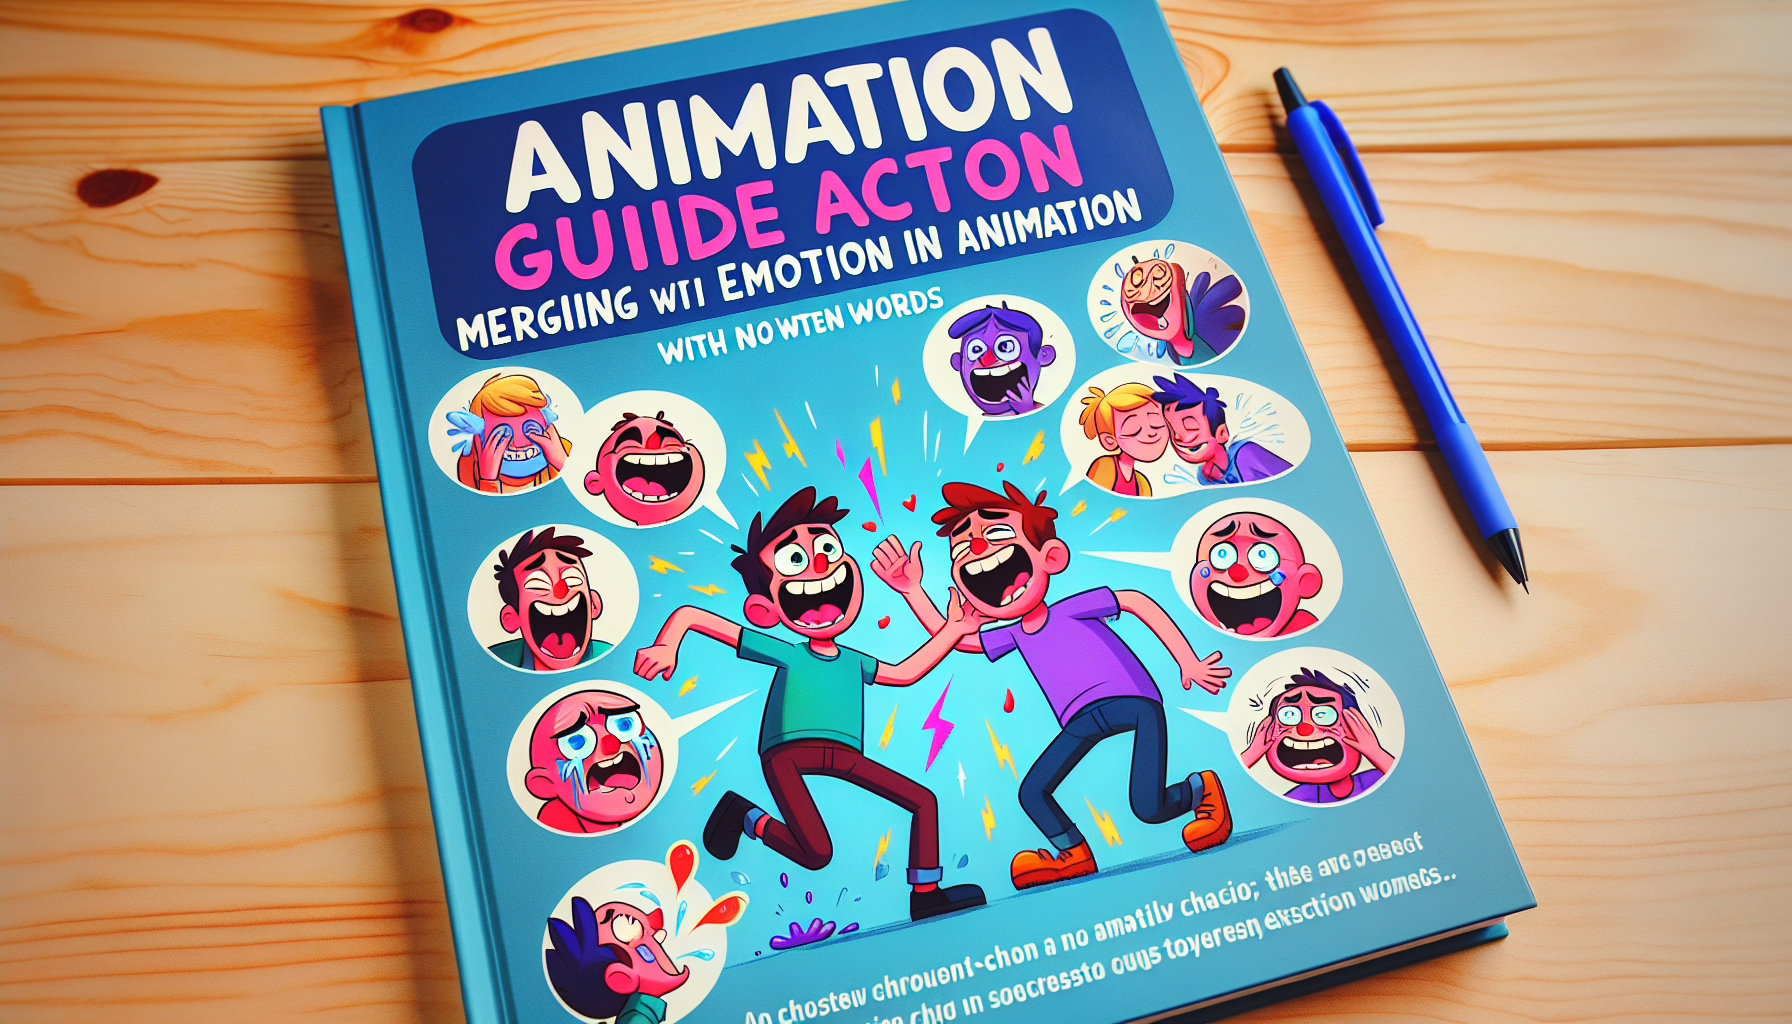 Create an image of an animation guide book. The book's cover is full of vibrant pops of colors to signify its modern approach. It should visually depict the idea of merging humor with emotion in animation with no written words. For instance, illustrate two cartoon characters engaging in a dialogue - one character is visibly joyous (symbolizing humor), while the other is emotionally touched (expressing emotion). The characters should be creatively designed showing evident actions - the humorous character might be laughing exuberantly while the emotional character might be shedding a tear of joy or awe.